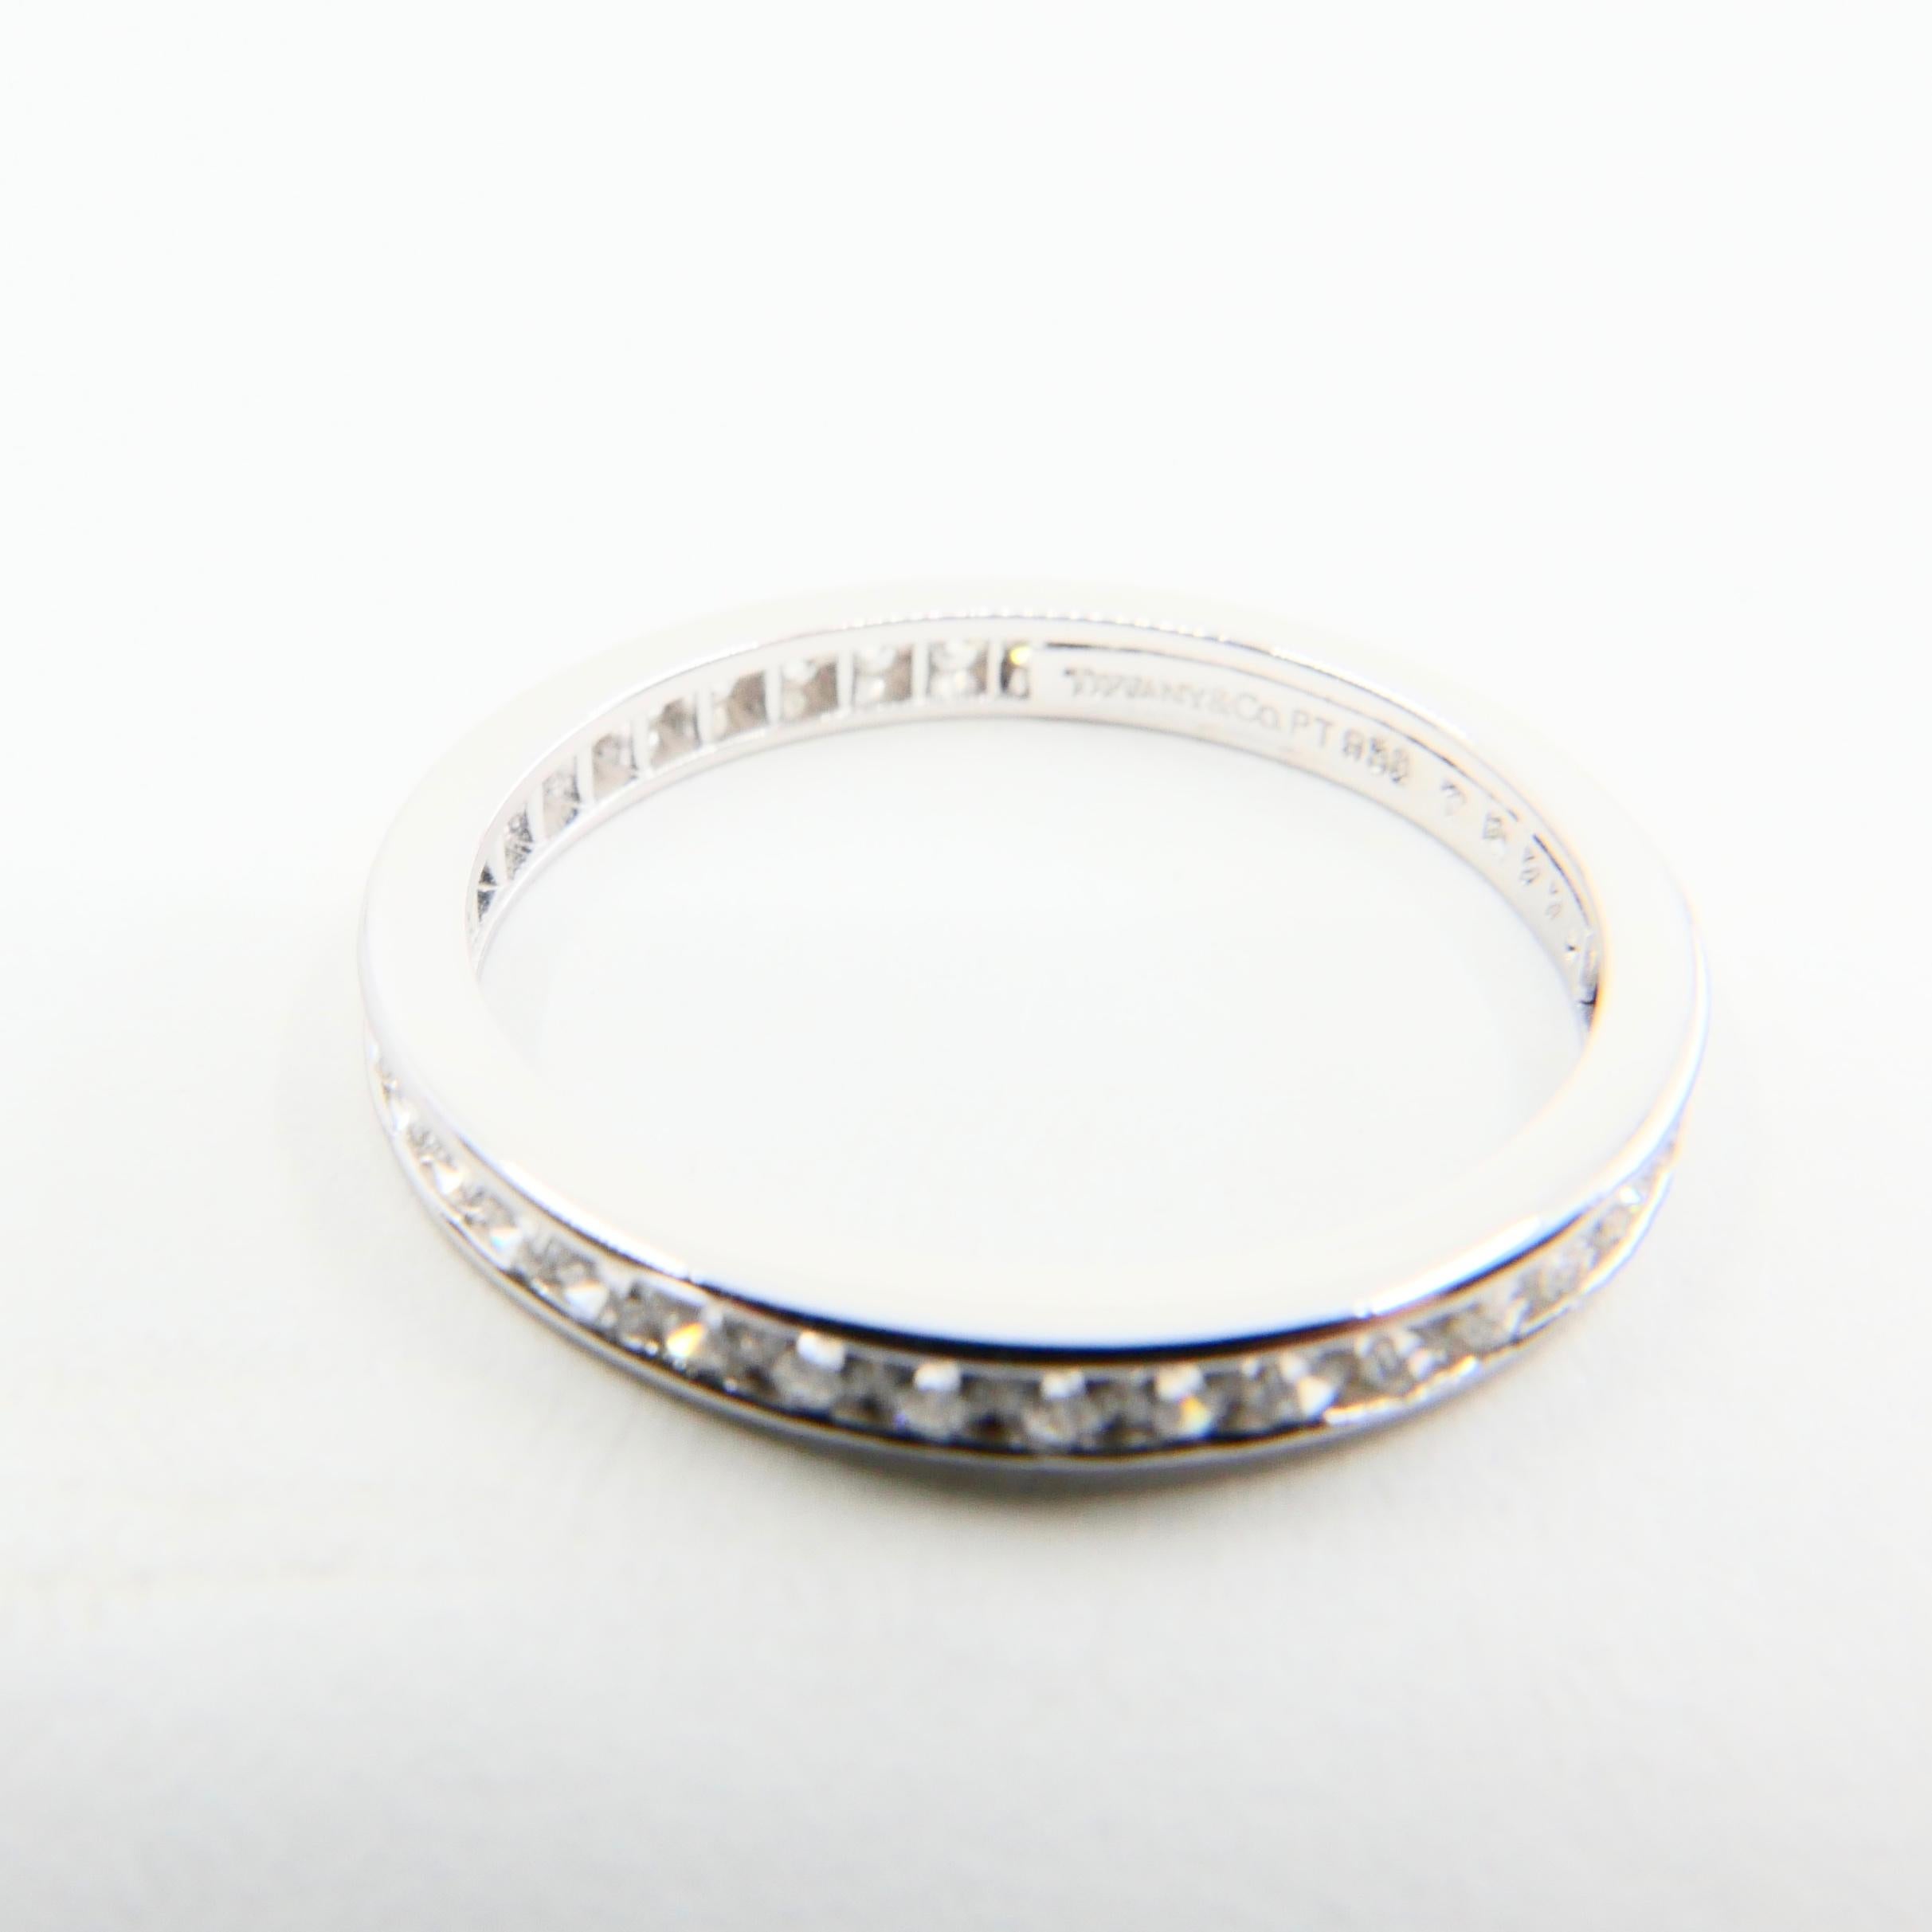 Women's Stamped Tiffany & Co Platinum and Diamond Eternity Wedding Band. Classic